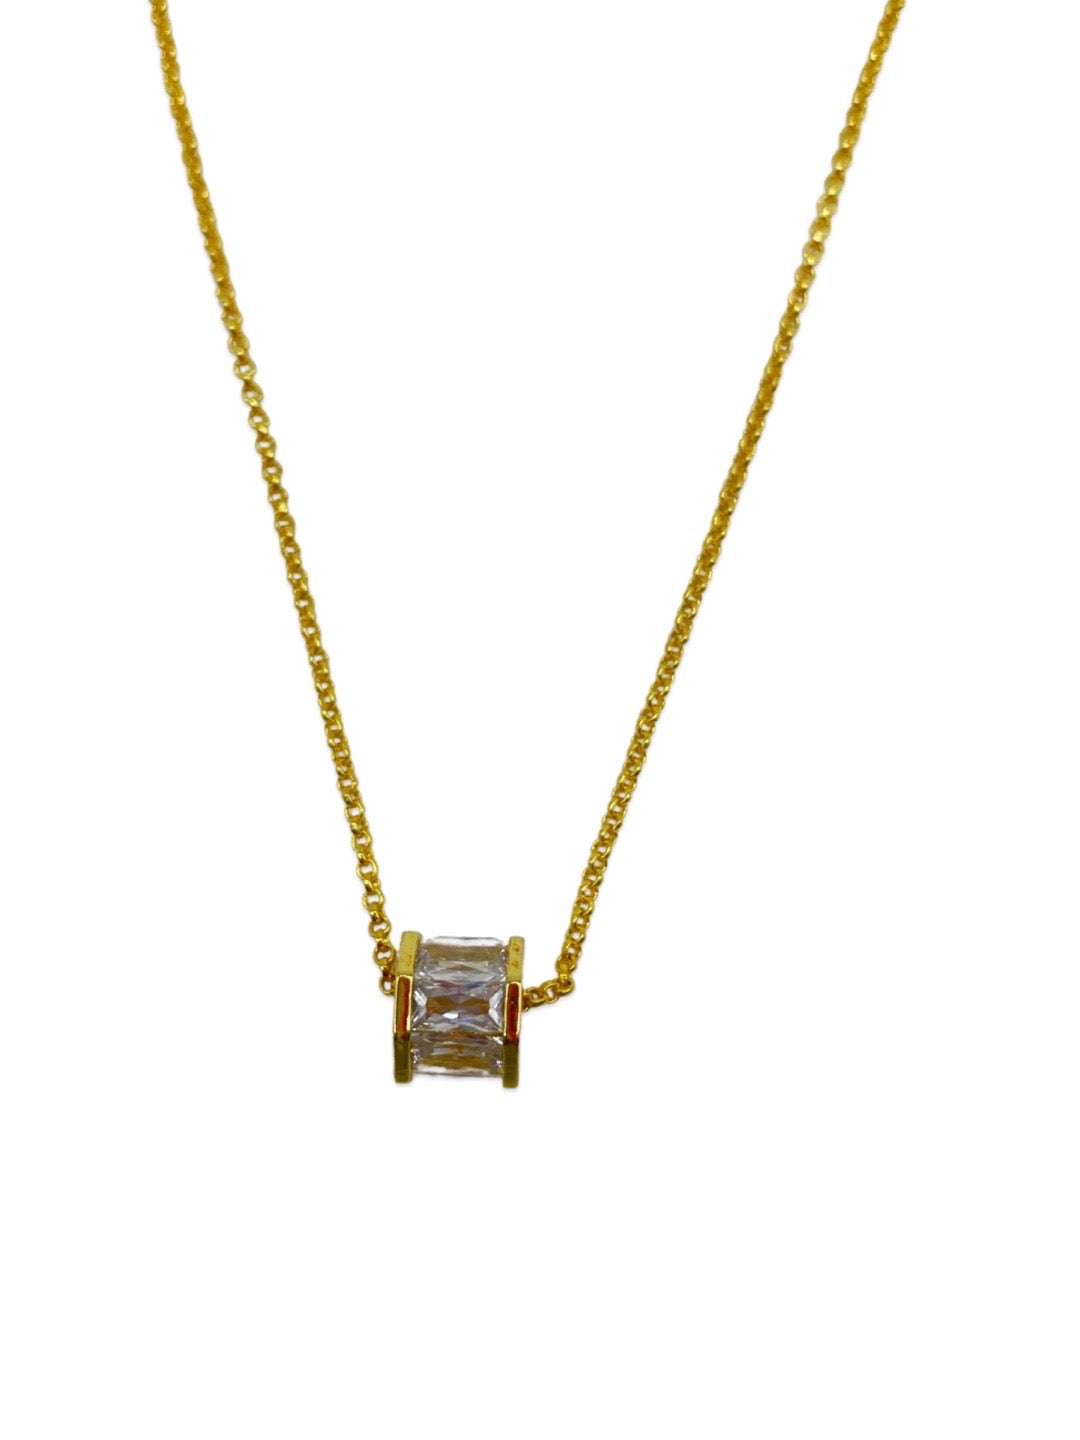 Buy Springtime Bloom Flower Pendant Necklace In Gold Plated 925 Silver from  Shaya by CaratLane